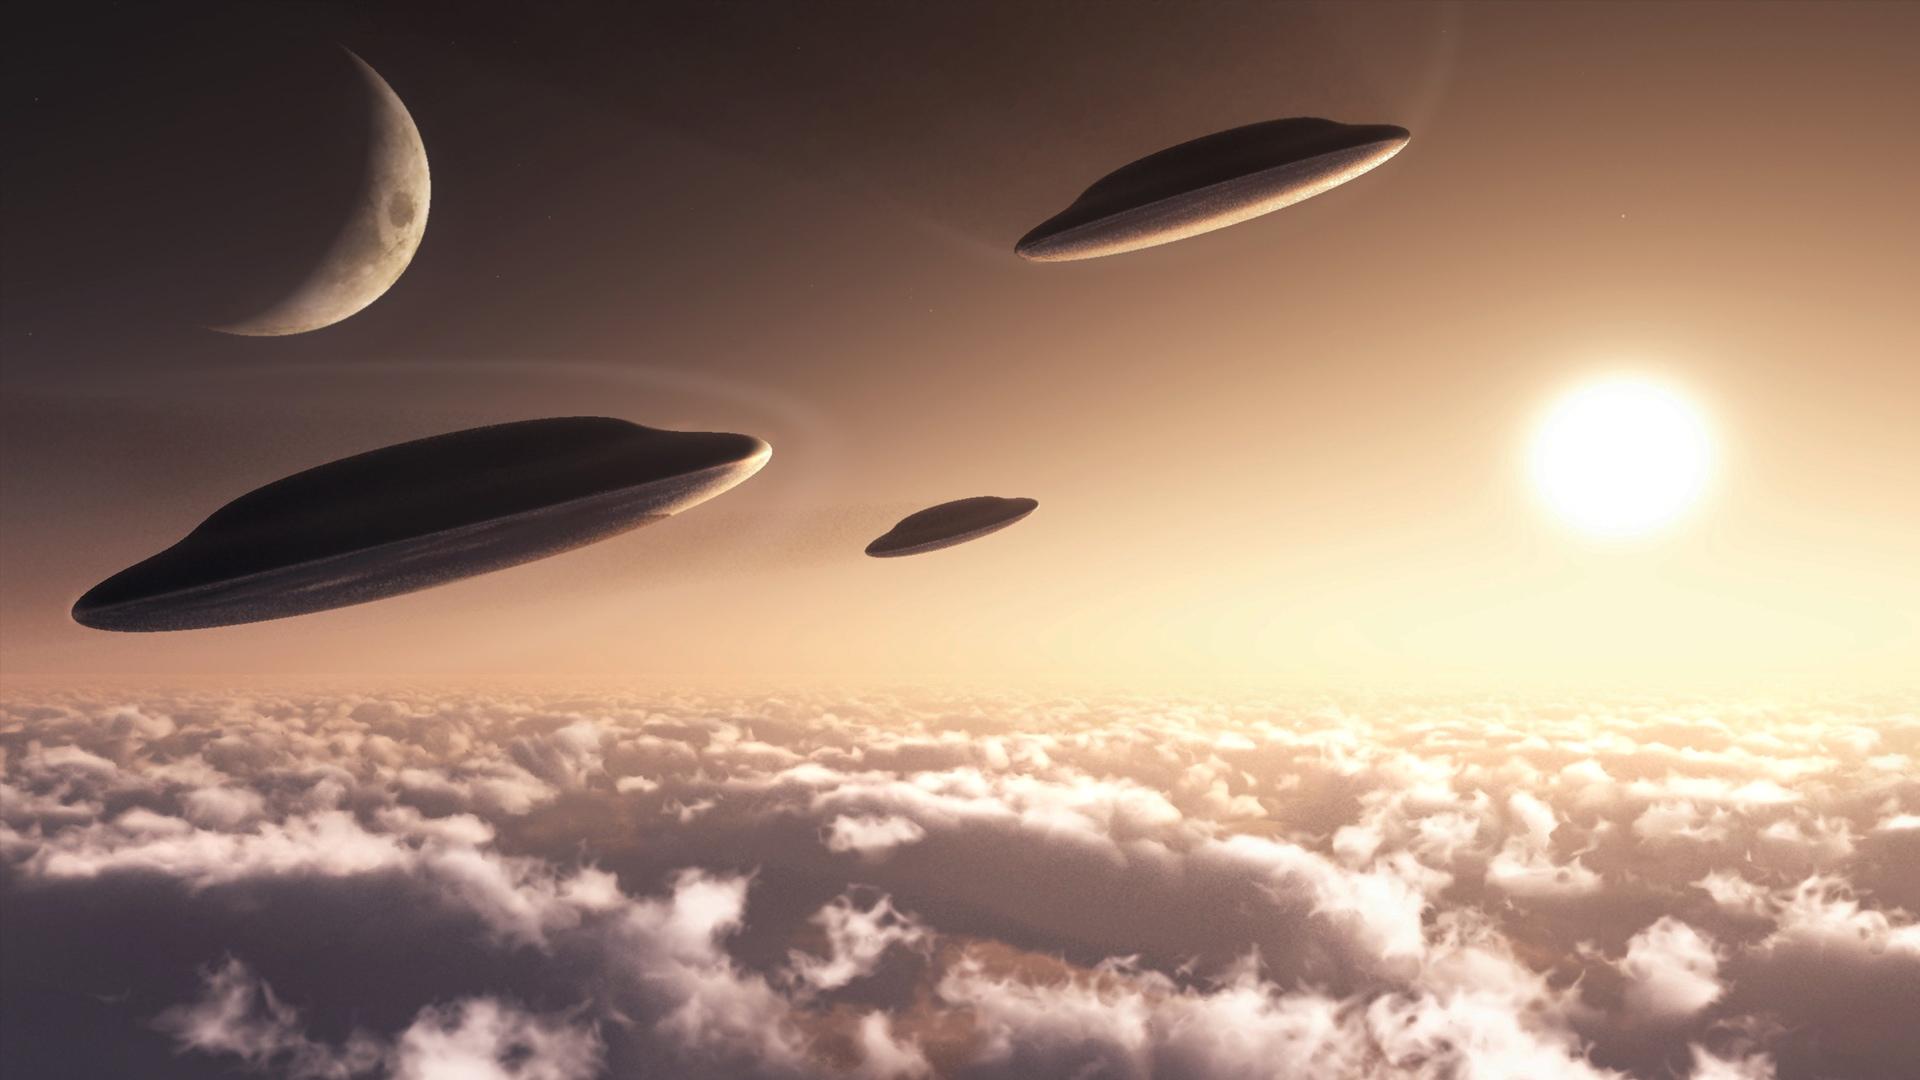 Ufo Wallpaper Pictures